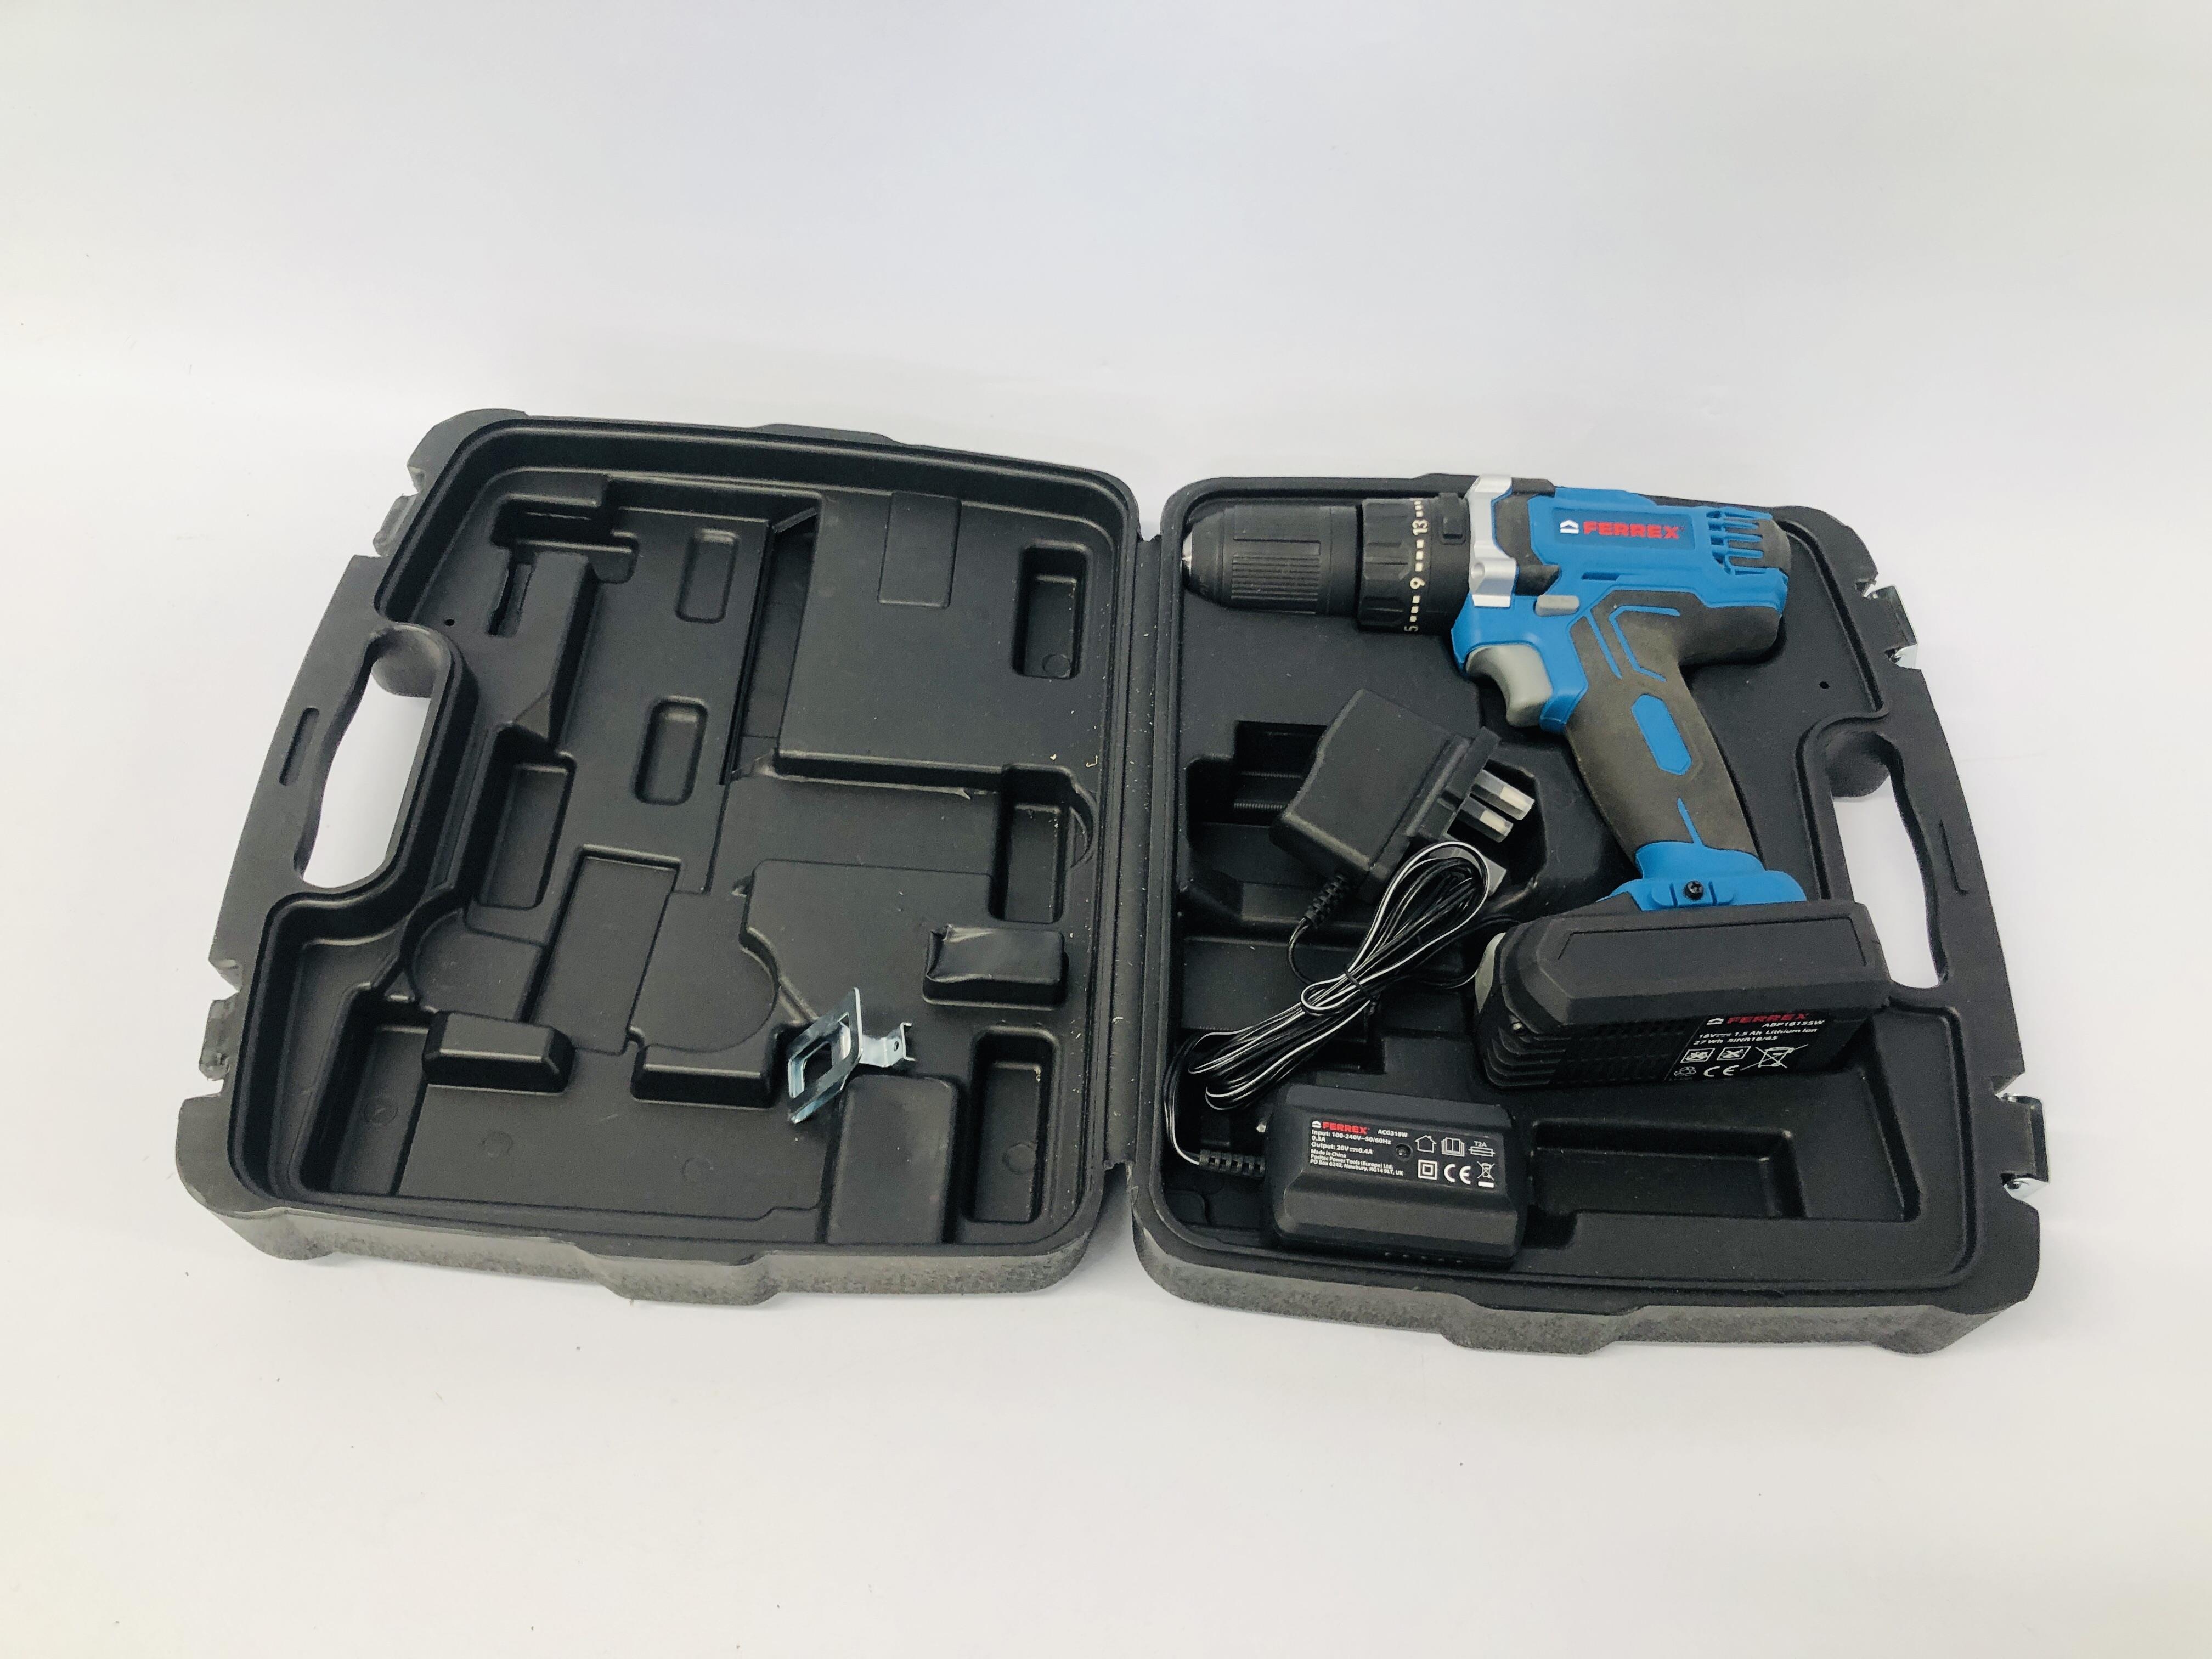 A FERREX 18V CORDLESS BATTERY DRILL COMPLETE WITH BATTERY AND CHERGER - SOLD AS SEEN